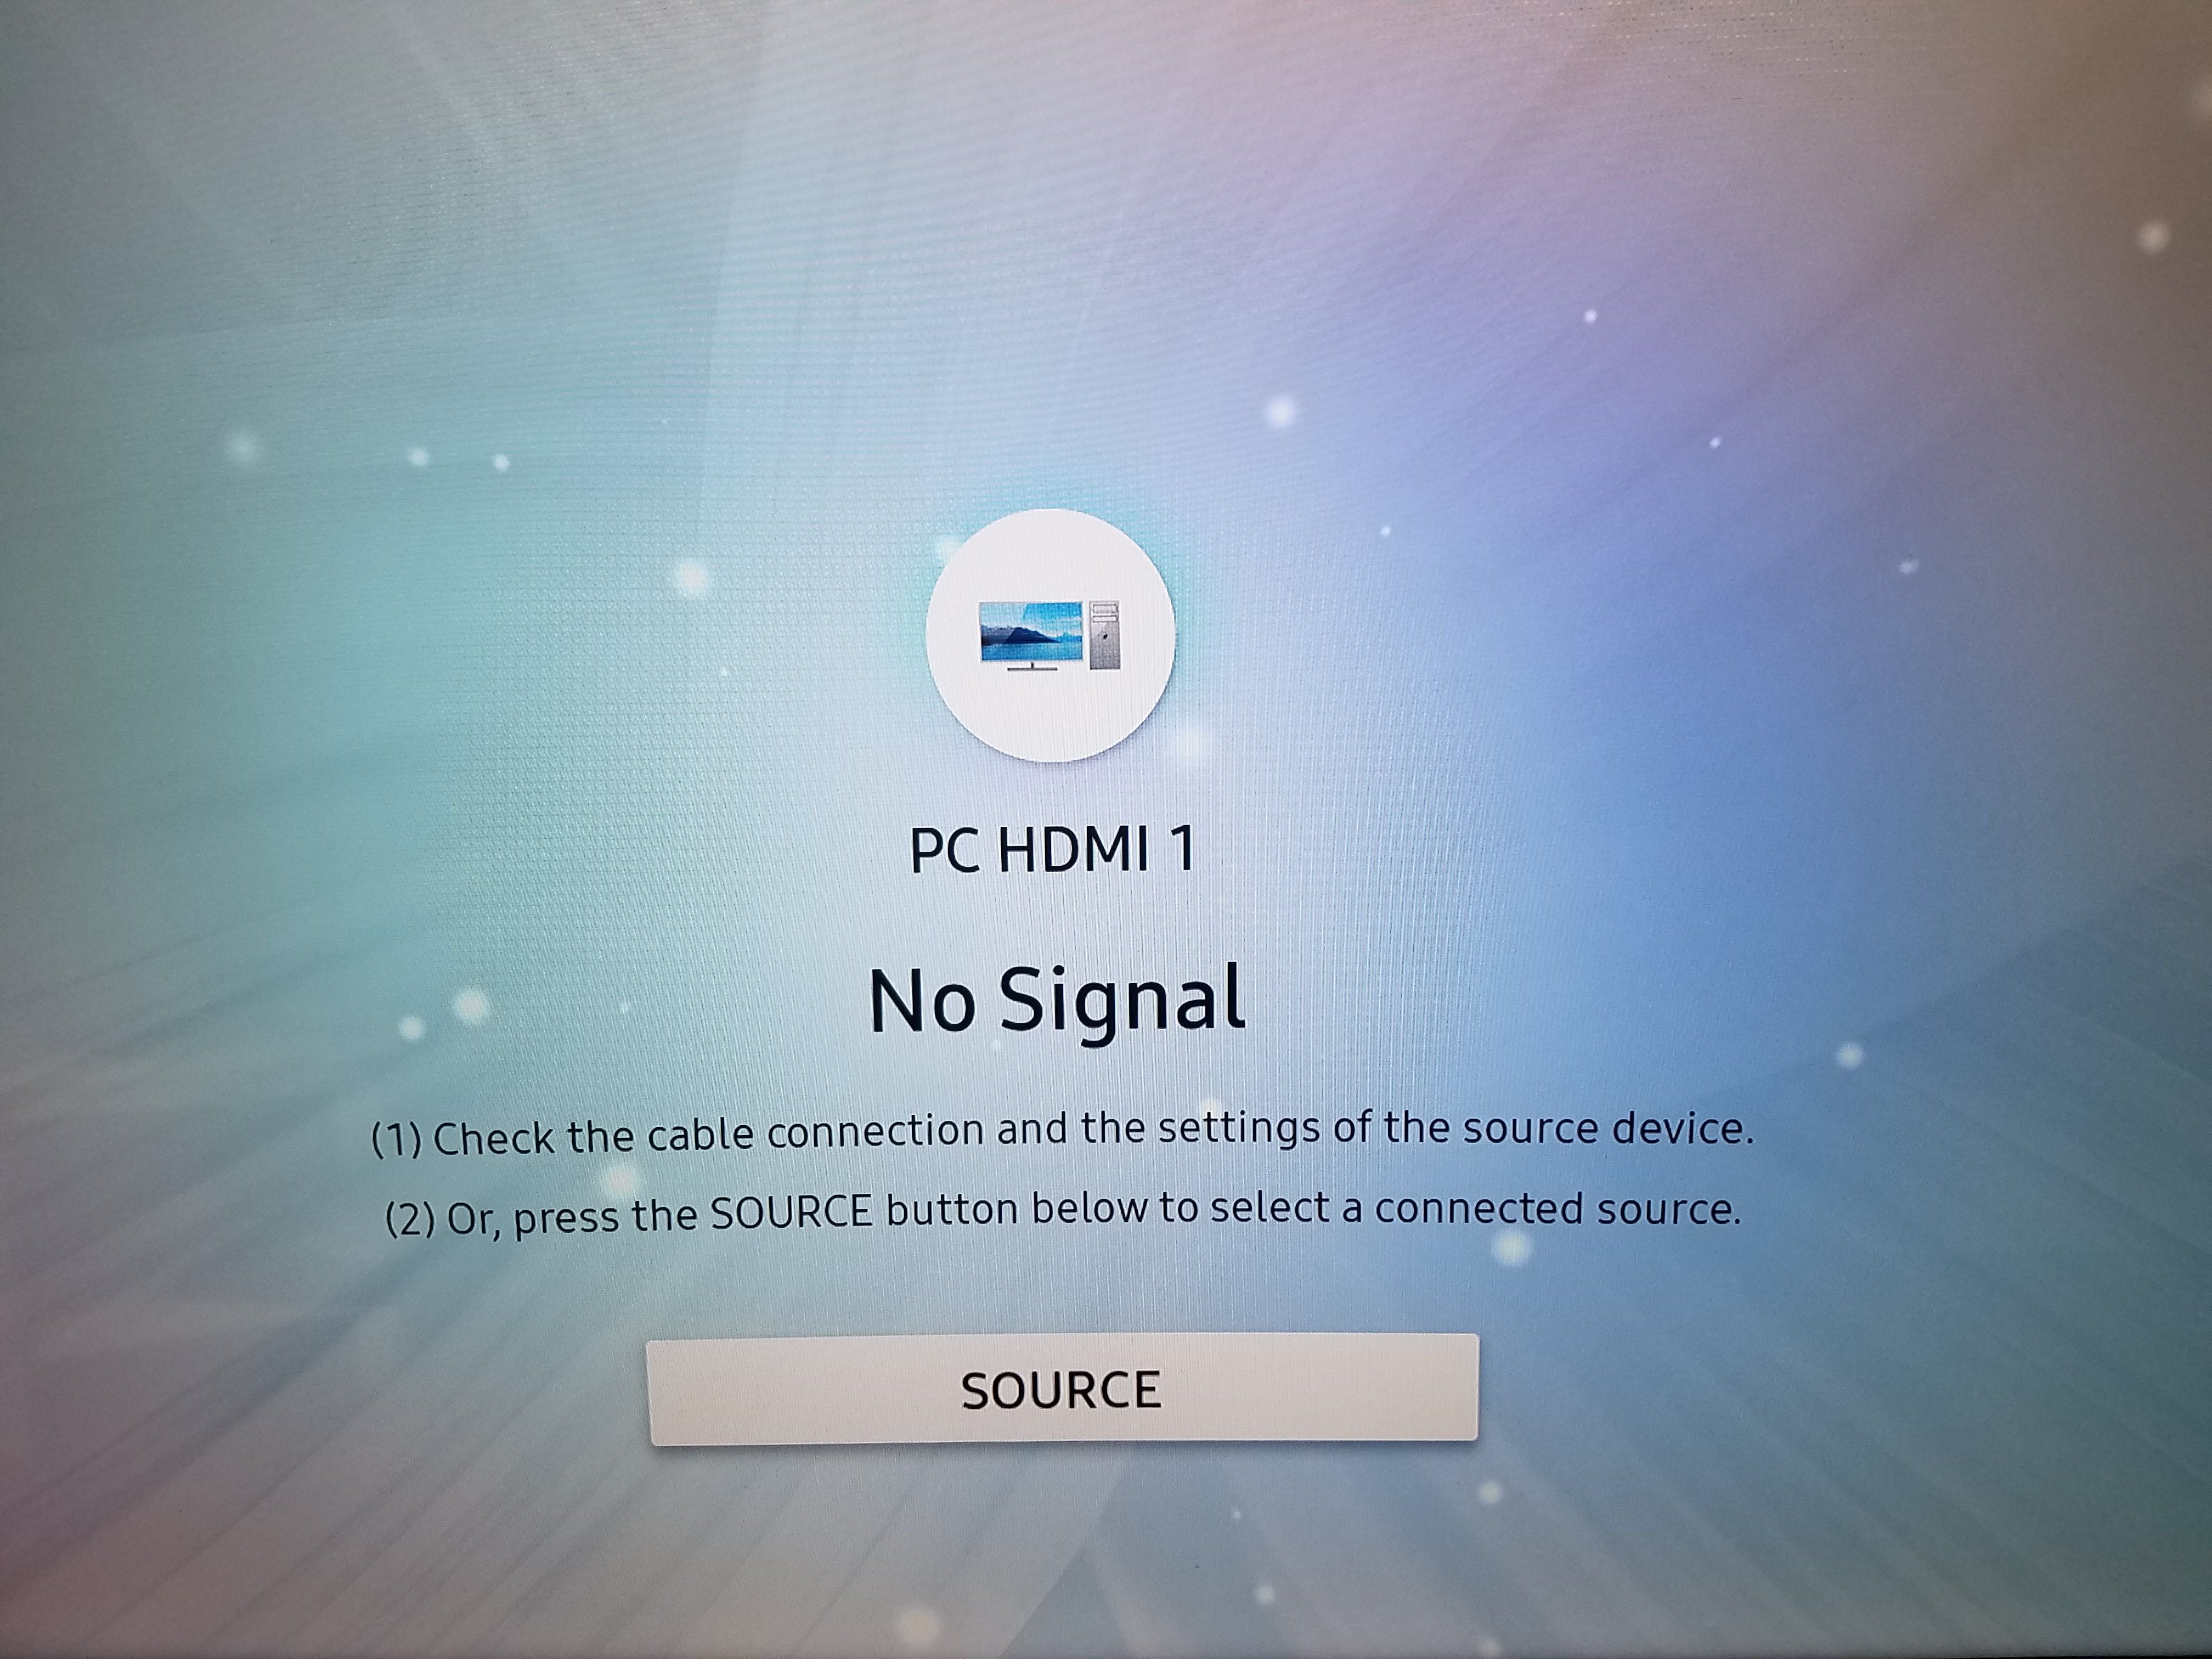 Possible To Change No Signal Screen To Something Less Bright Samsung Community